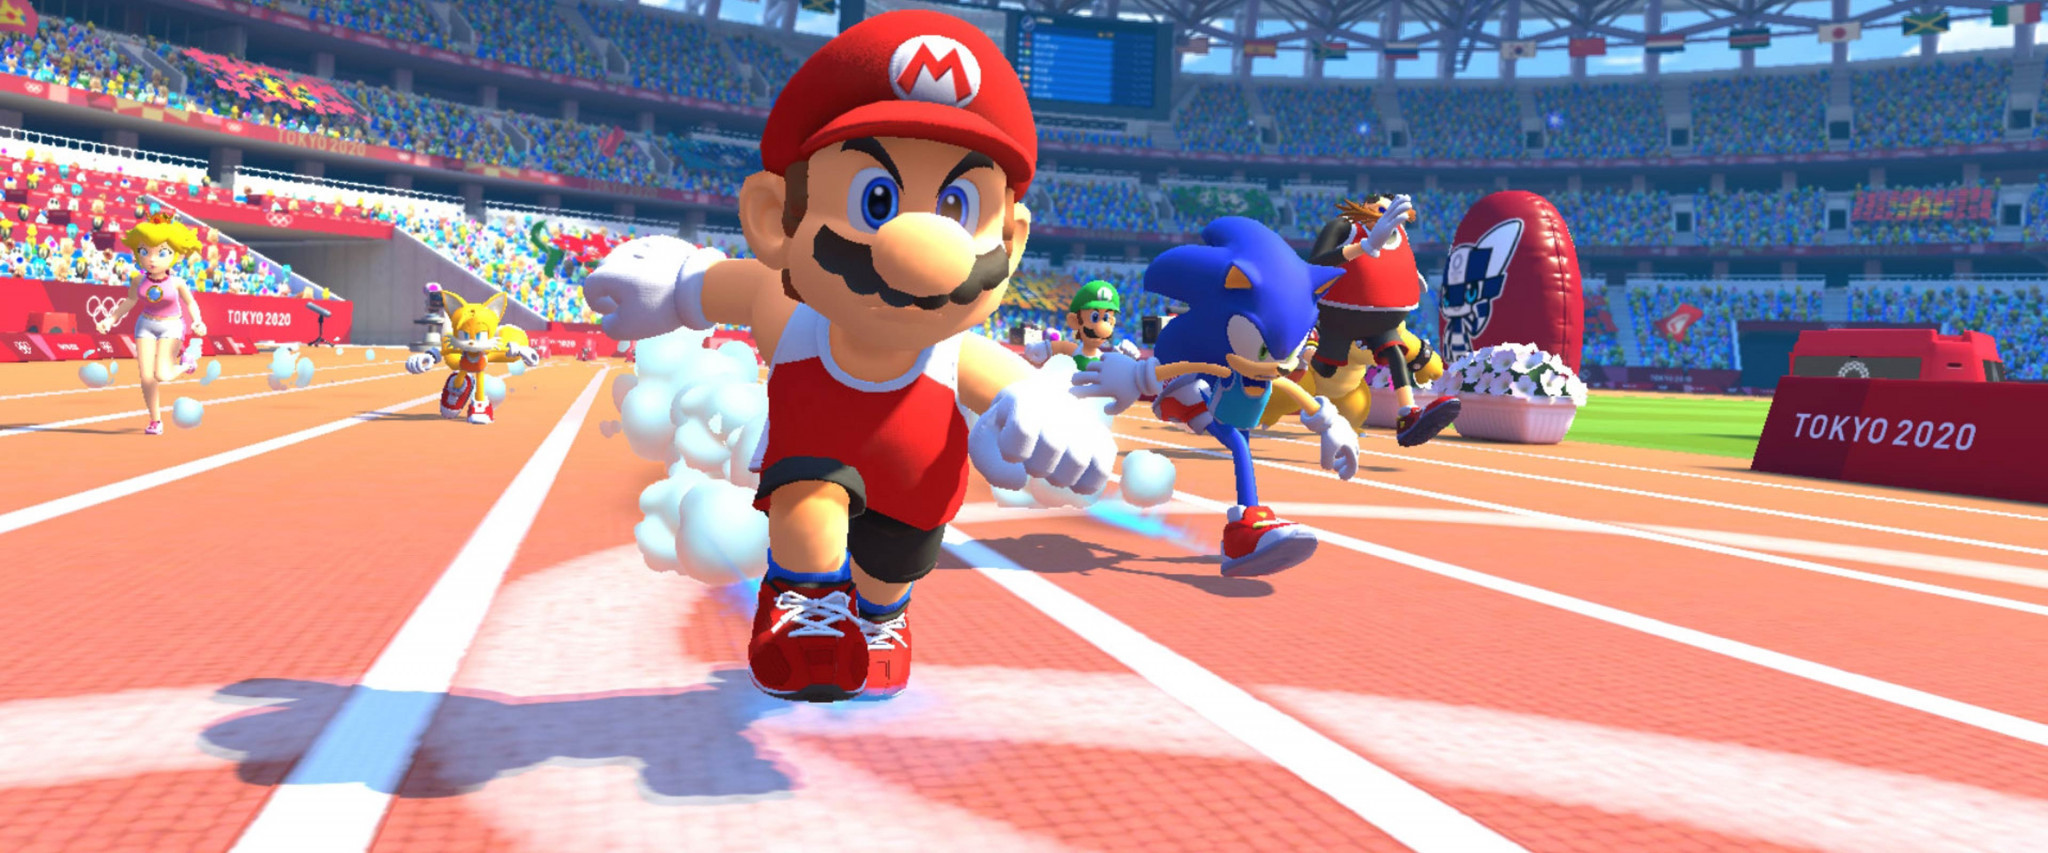 Mario & Sonic at the Olympic Games Tokyo 2020 released in Americas